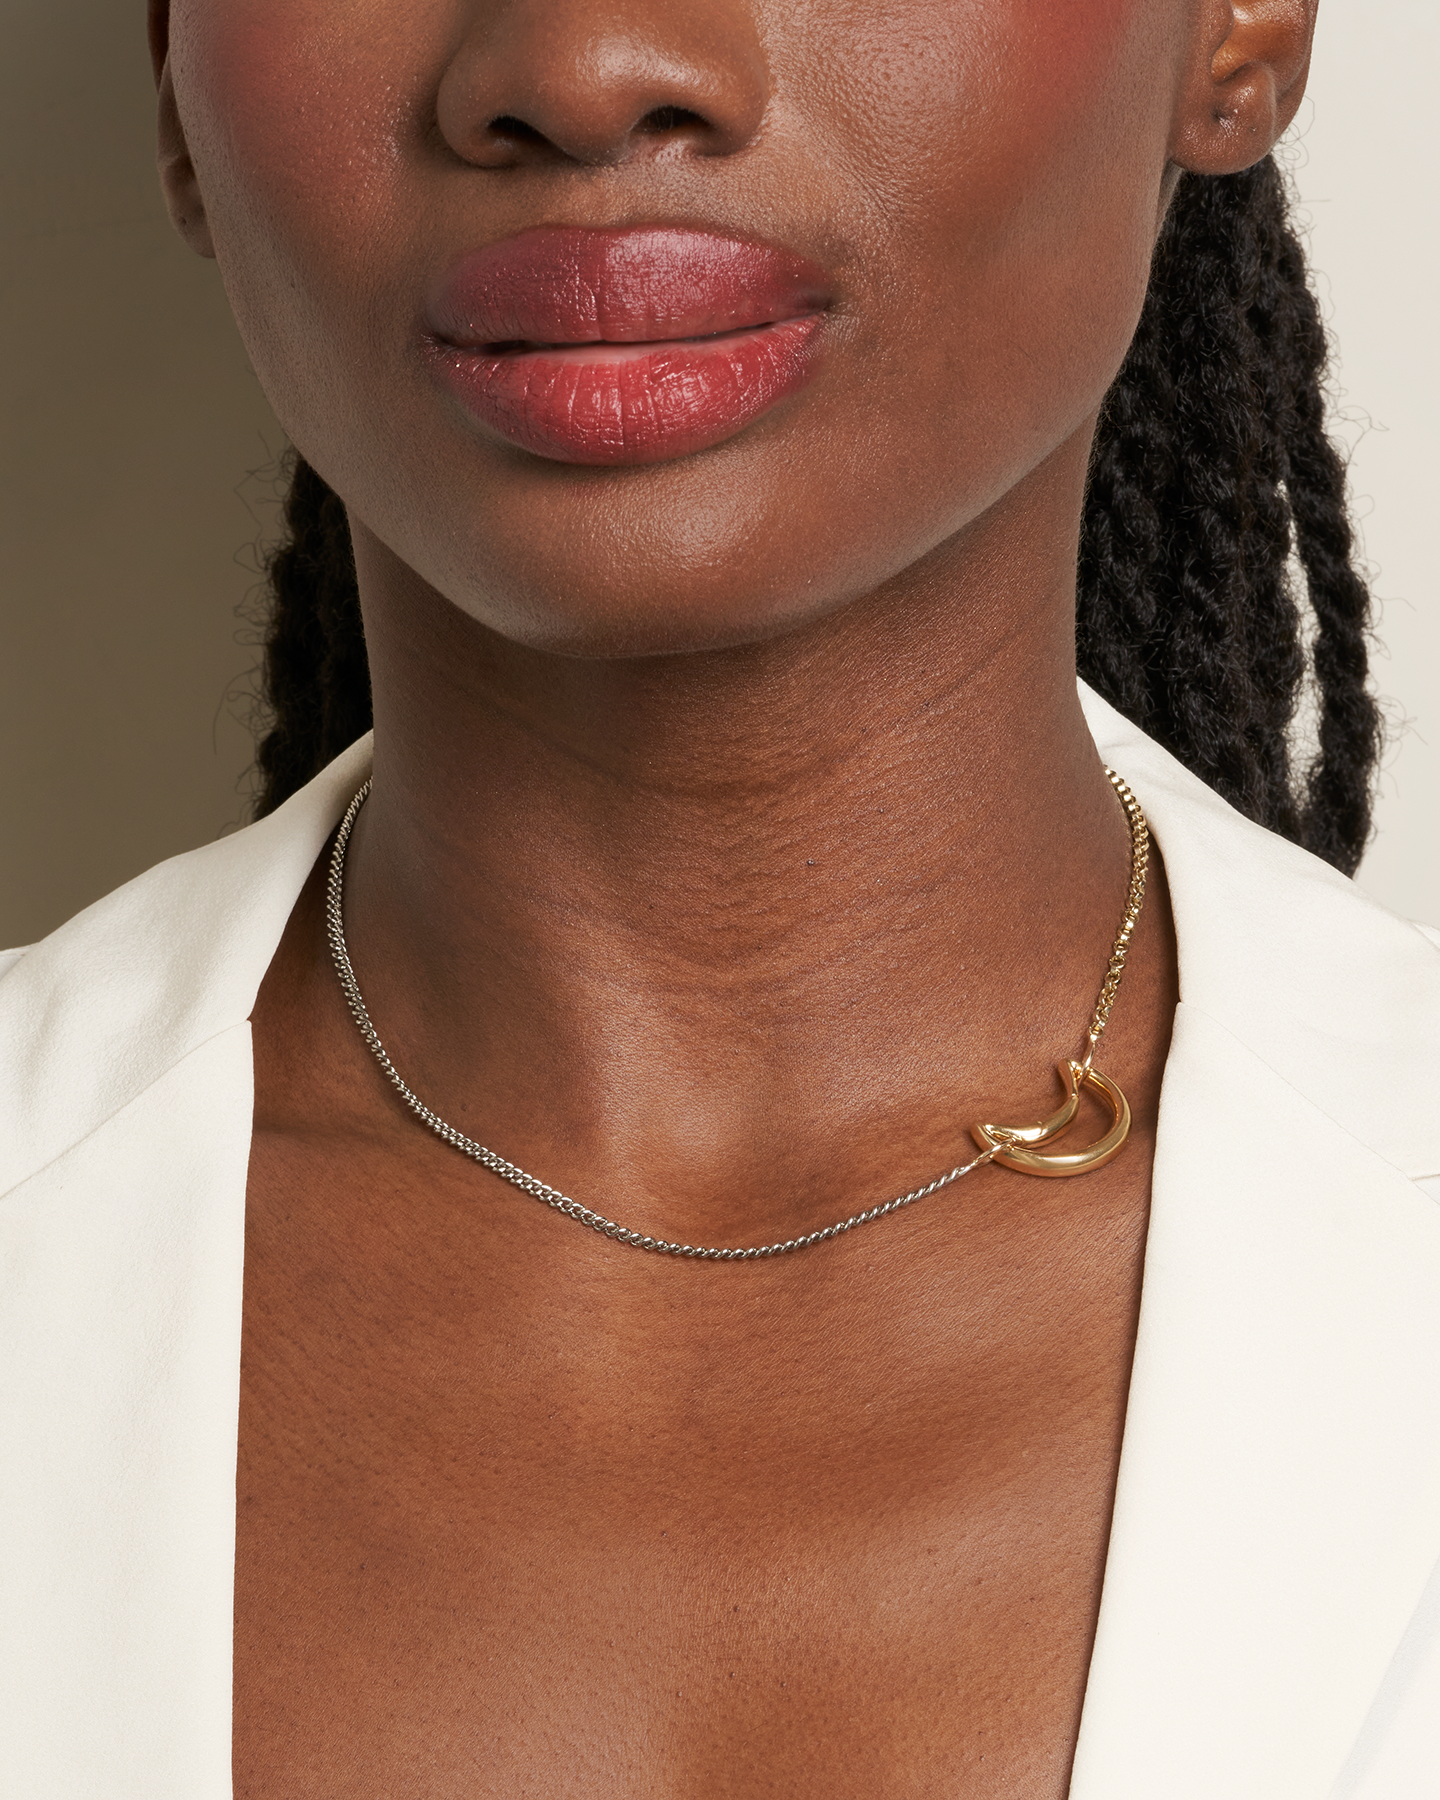 Close up of woman's decolletage wearing necklace with moon lock charm on the right side